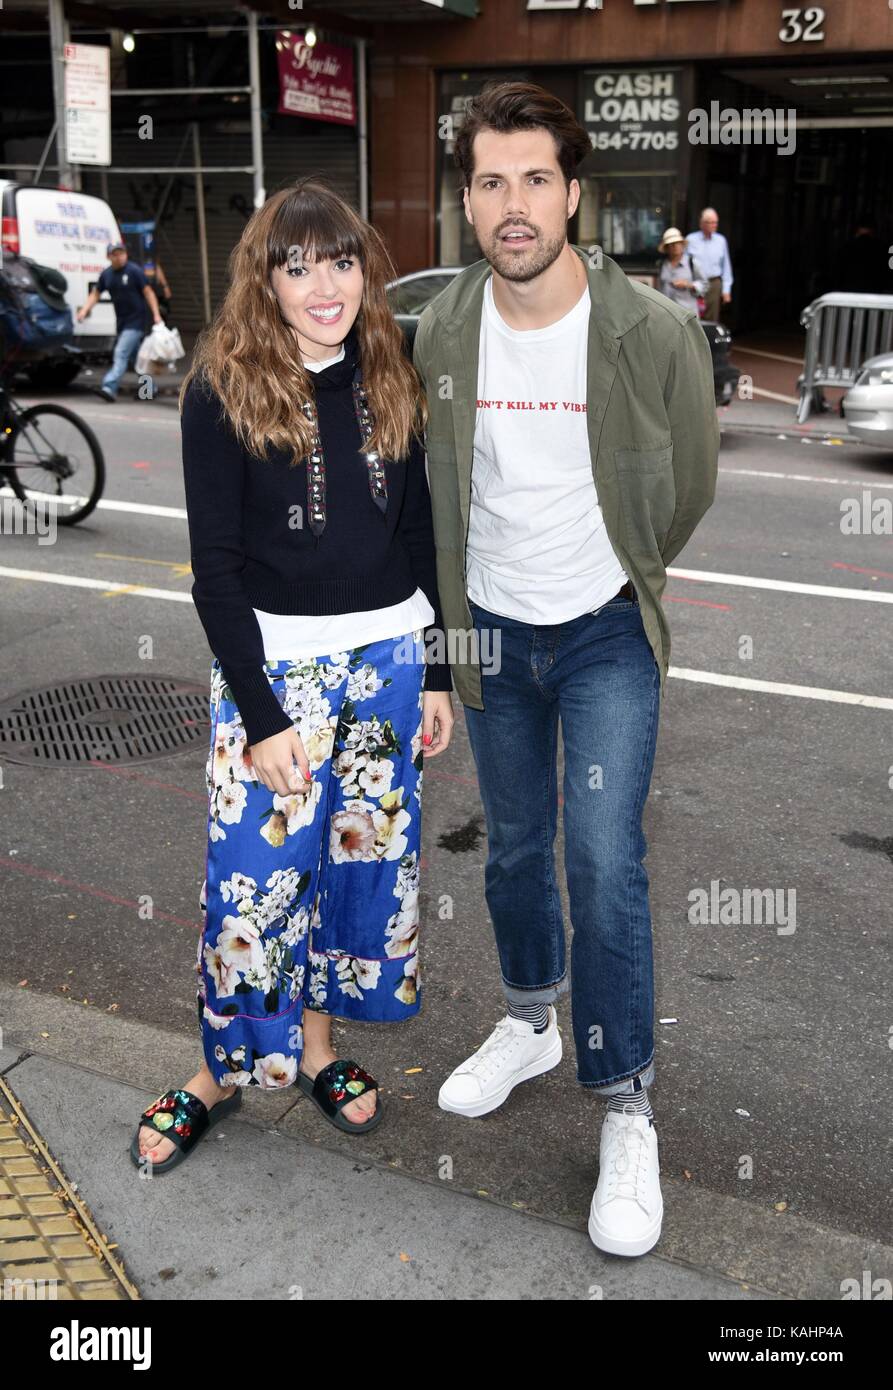 New York, NY, USA. 26th Sep, 2017. Oh Wonder, Josephine Vander Gucht, Anthony West out and about for Celebrity Candids - TUE, New York, NY September 26, 2017. Credit: Derek Storm/Everett Collection/Alamy Live News Stock Photo